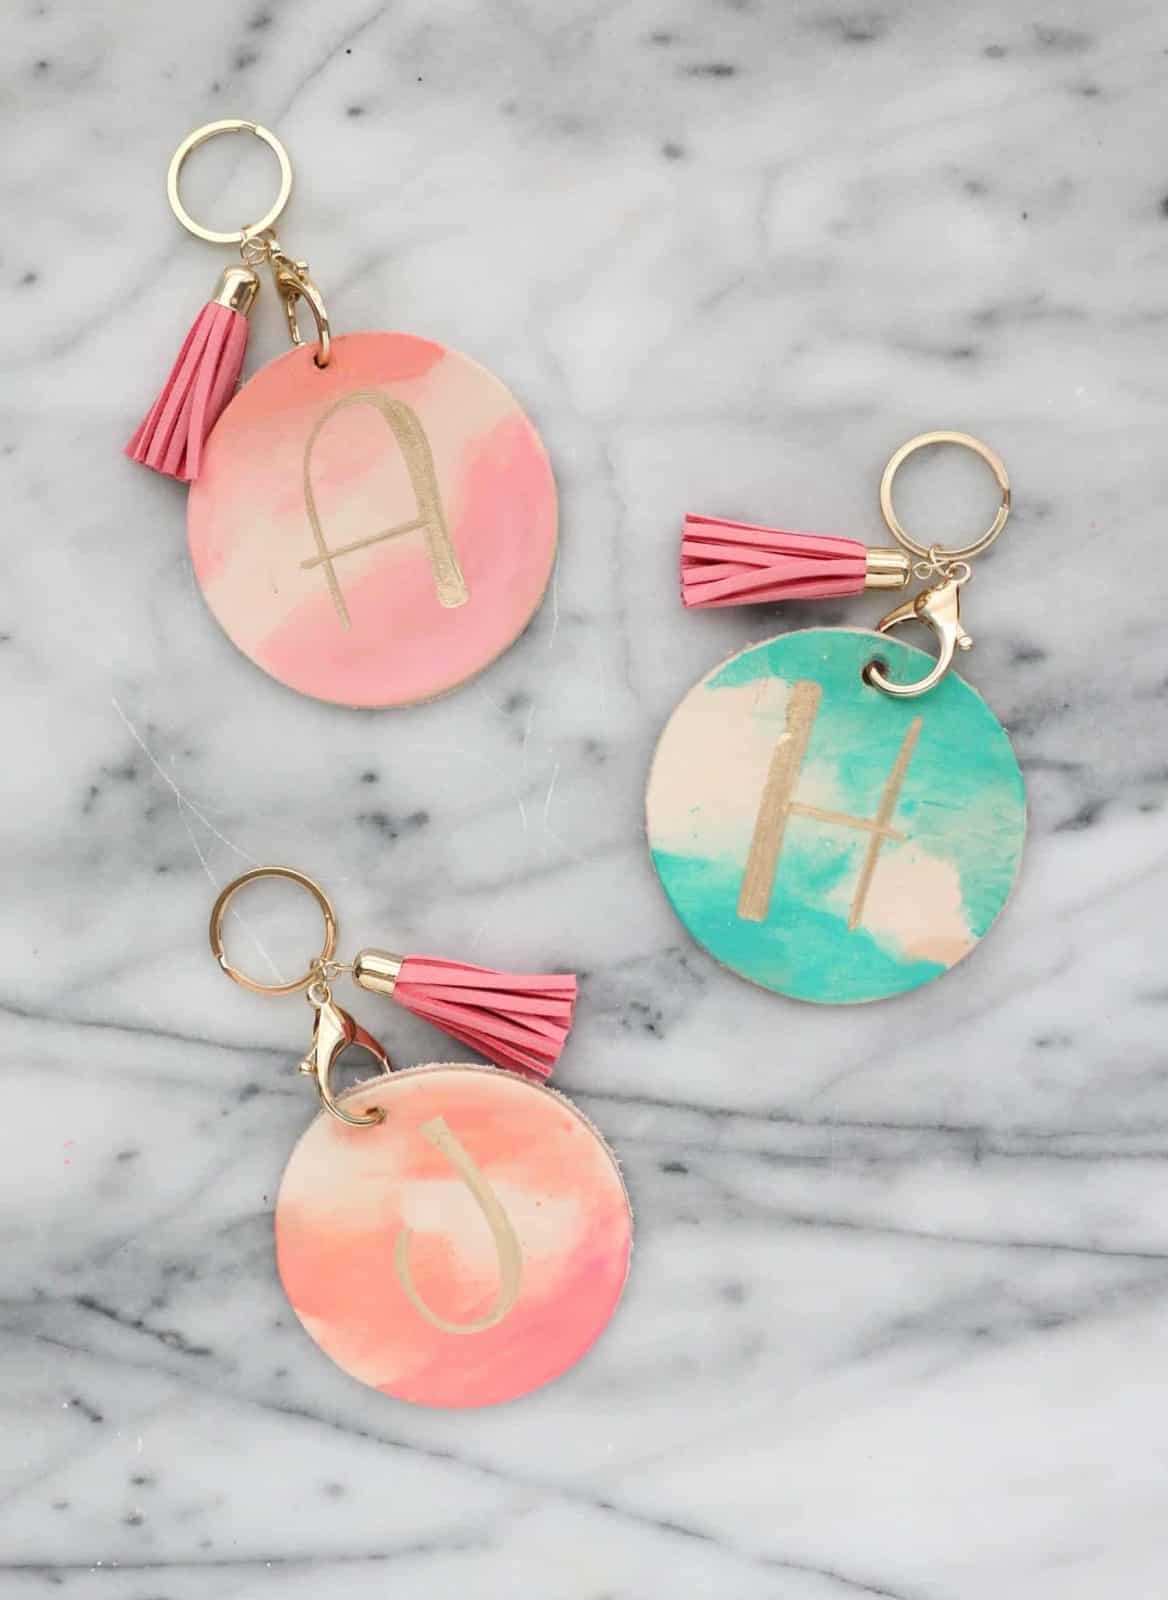 DIY watercolor monogram luggage tags for the friend who loves to travel